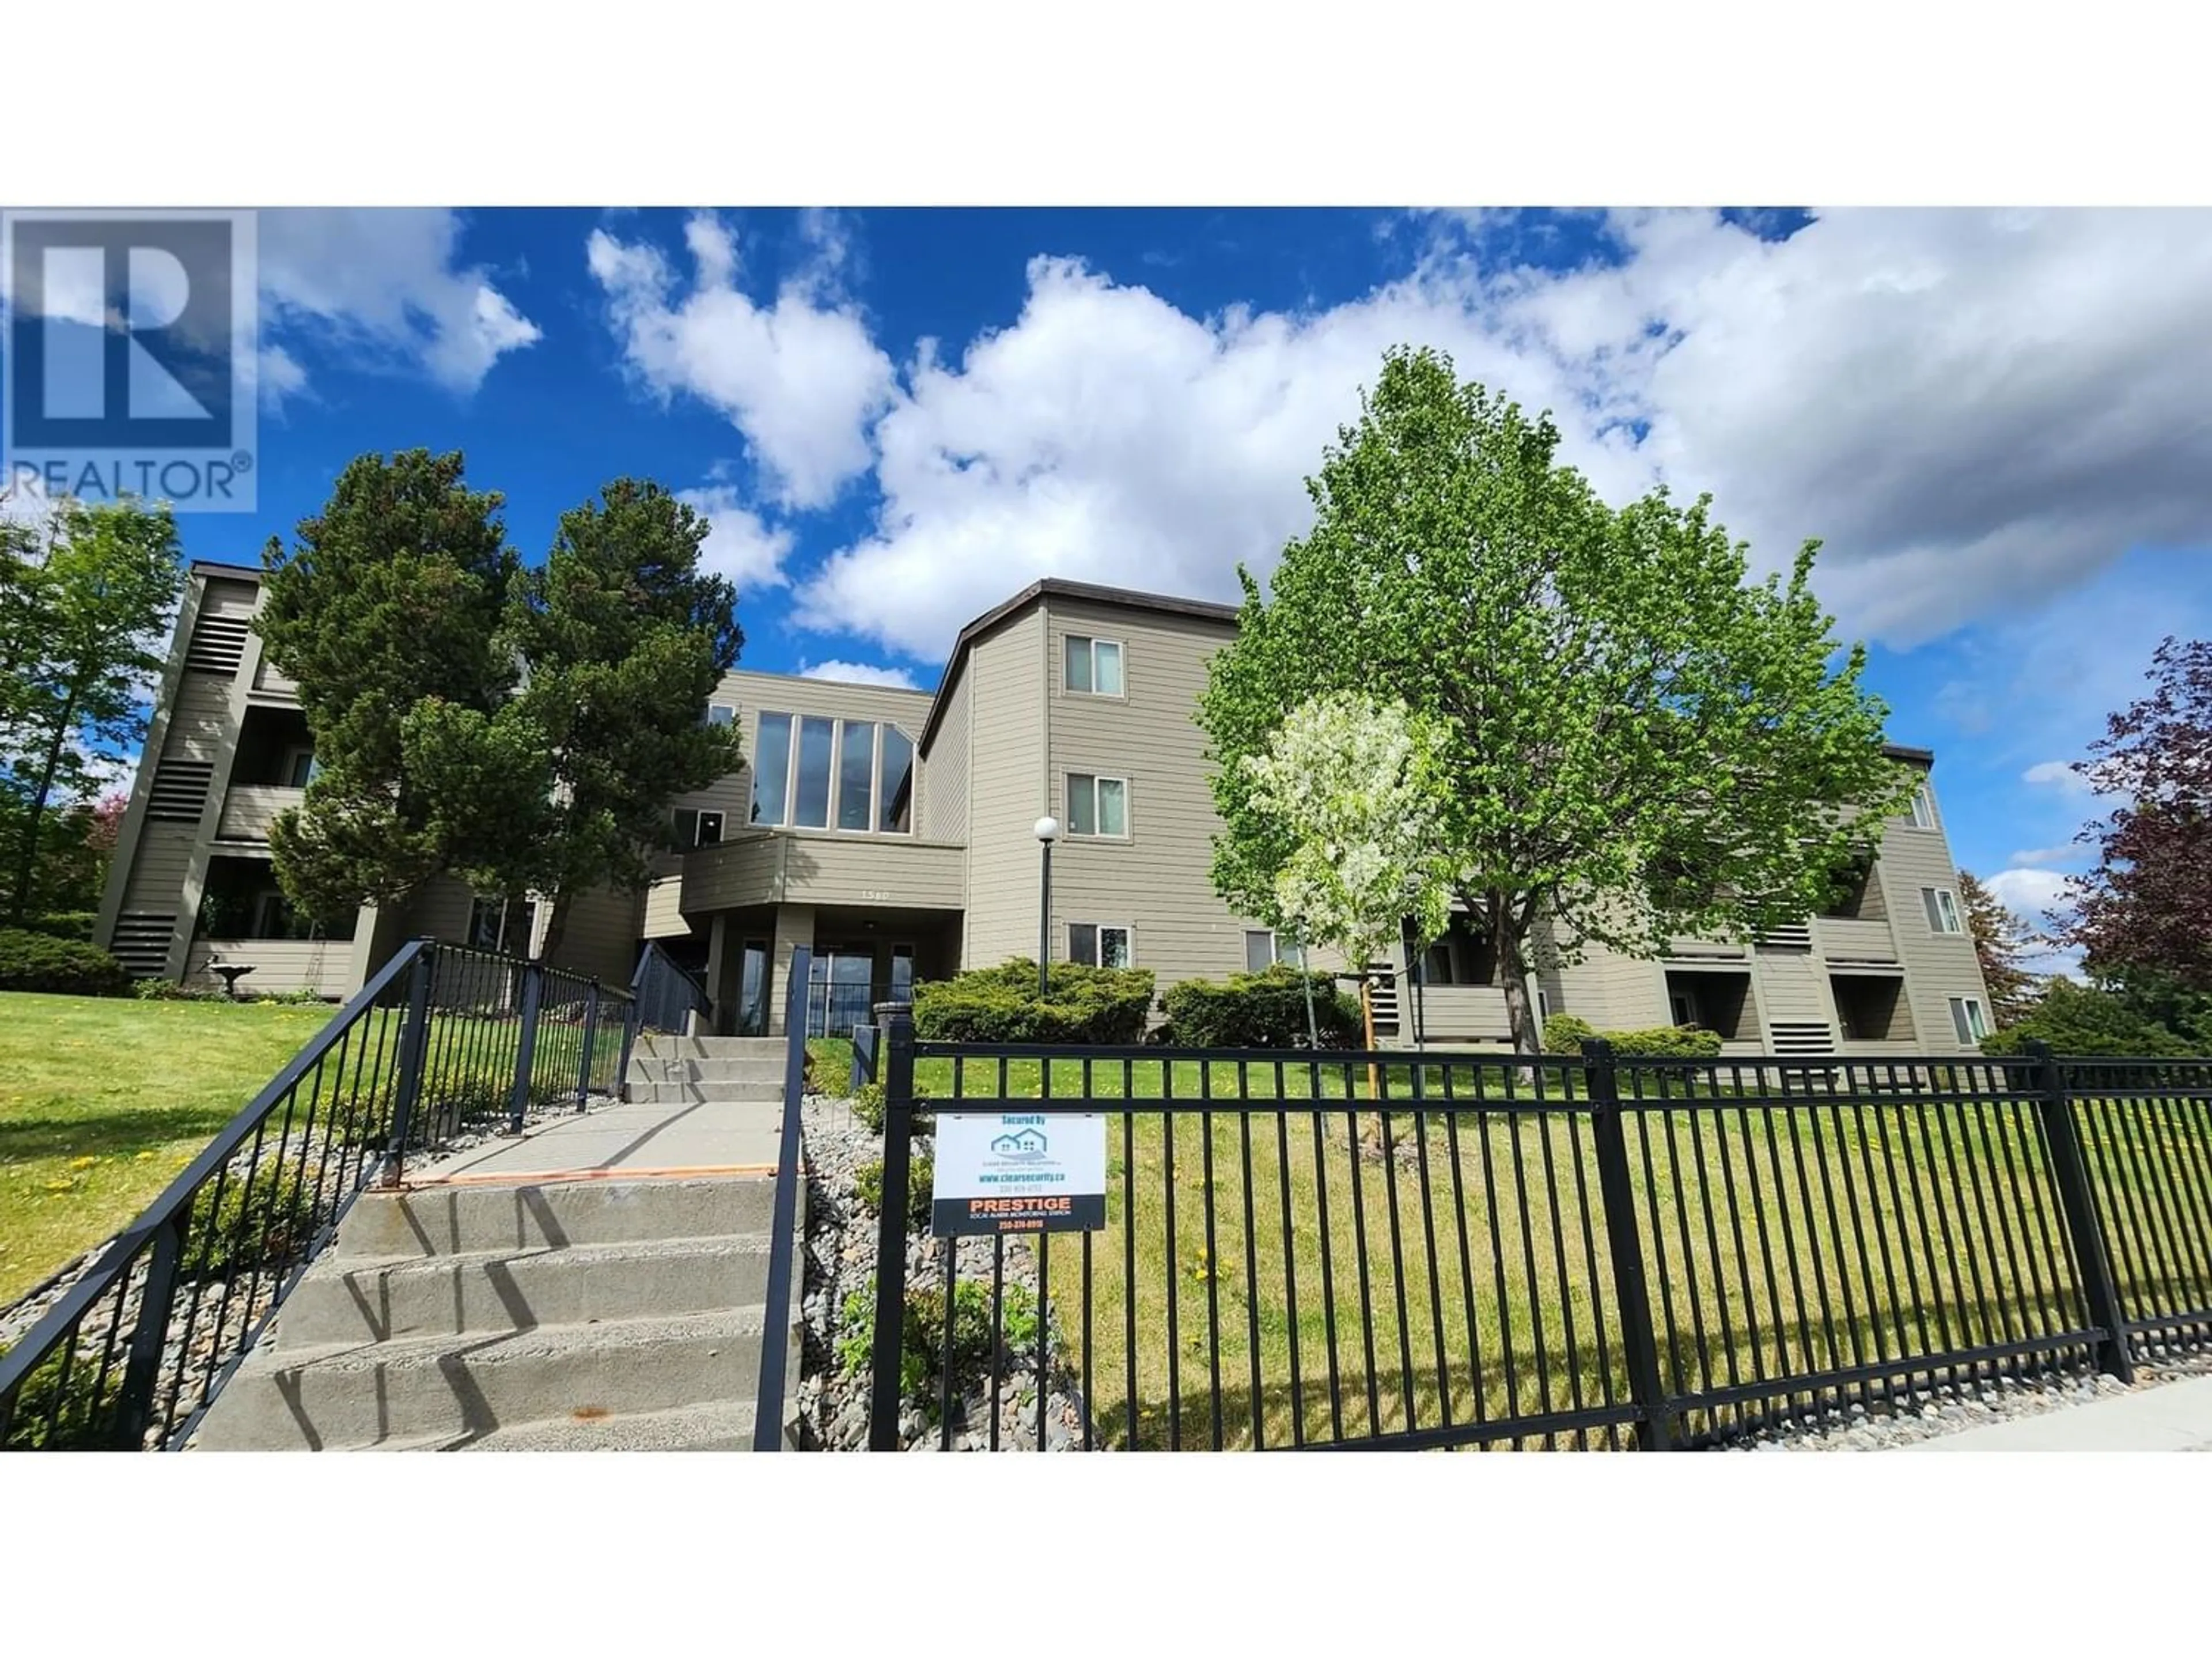 Outside view for 217-1560 SUMMIT DRIVE, Kamloops British Columbia V2E1R5